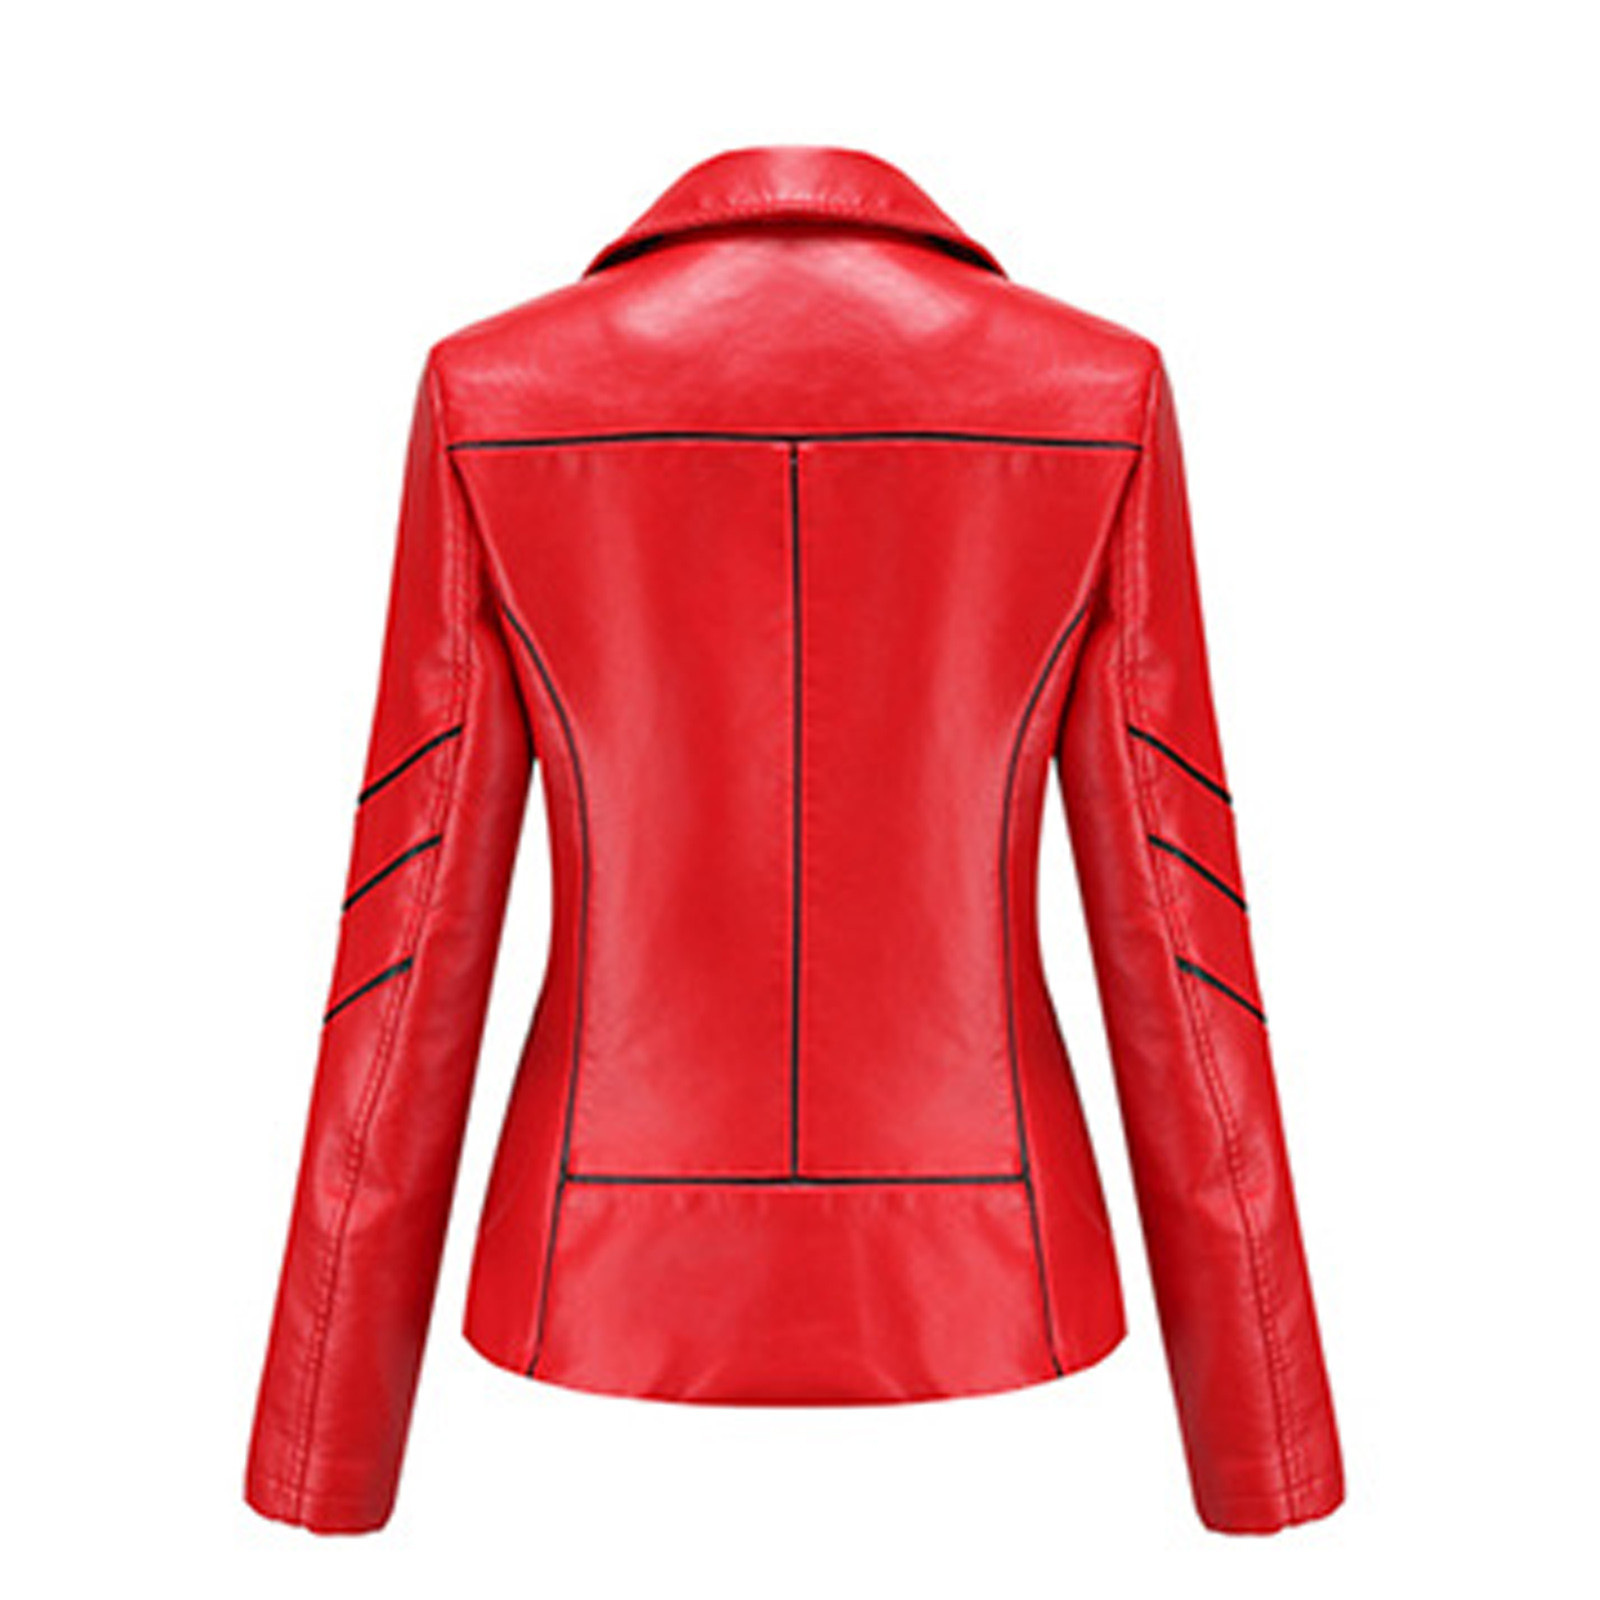 Juebong Womens Lapel Leather Jacket Coat Warm Moto Biker Jacket Outwear Slim Leather Solid Stand Collar Zip Motorcycle Suit Coat Jacket with Pockets, Red, XL - image 3 of 6